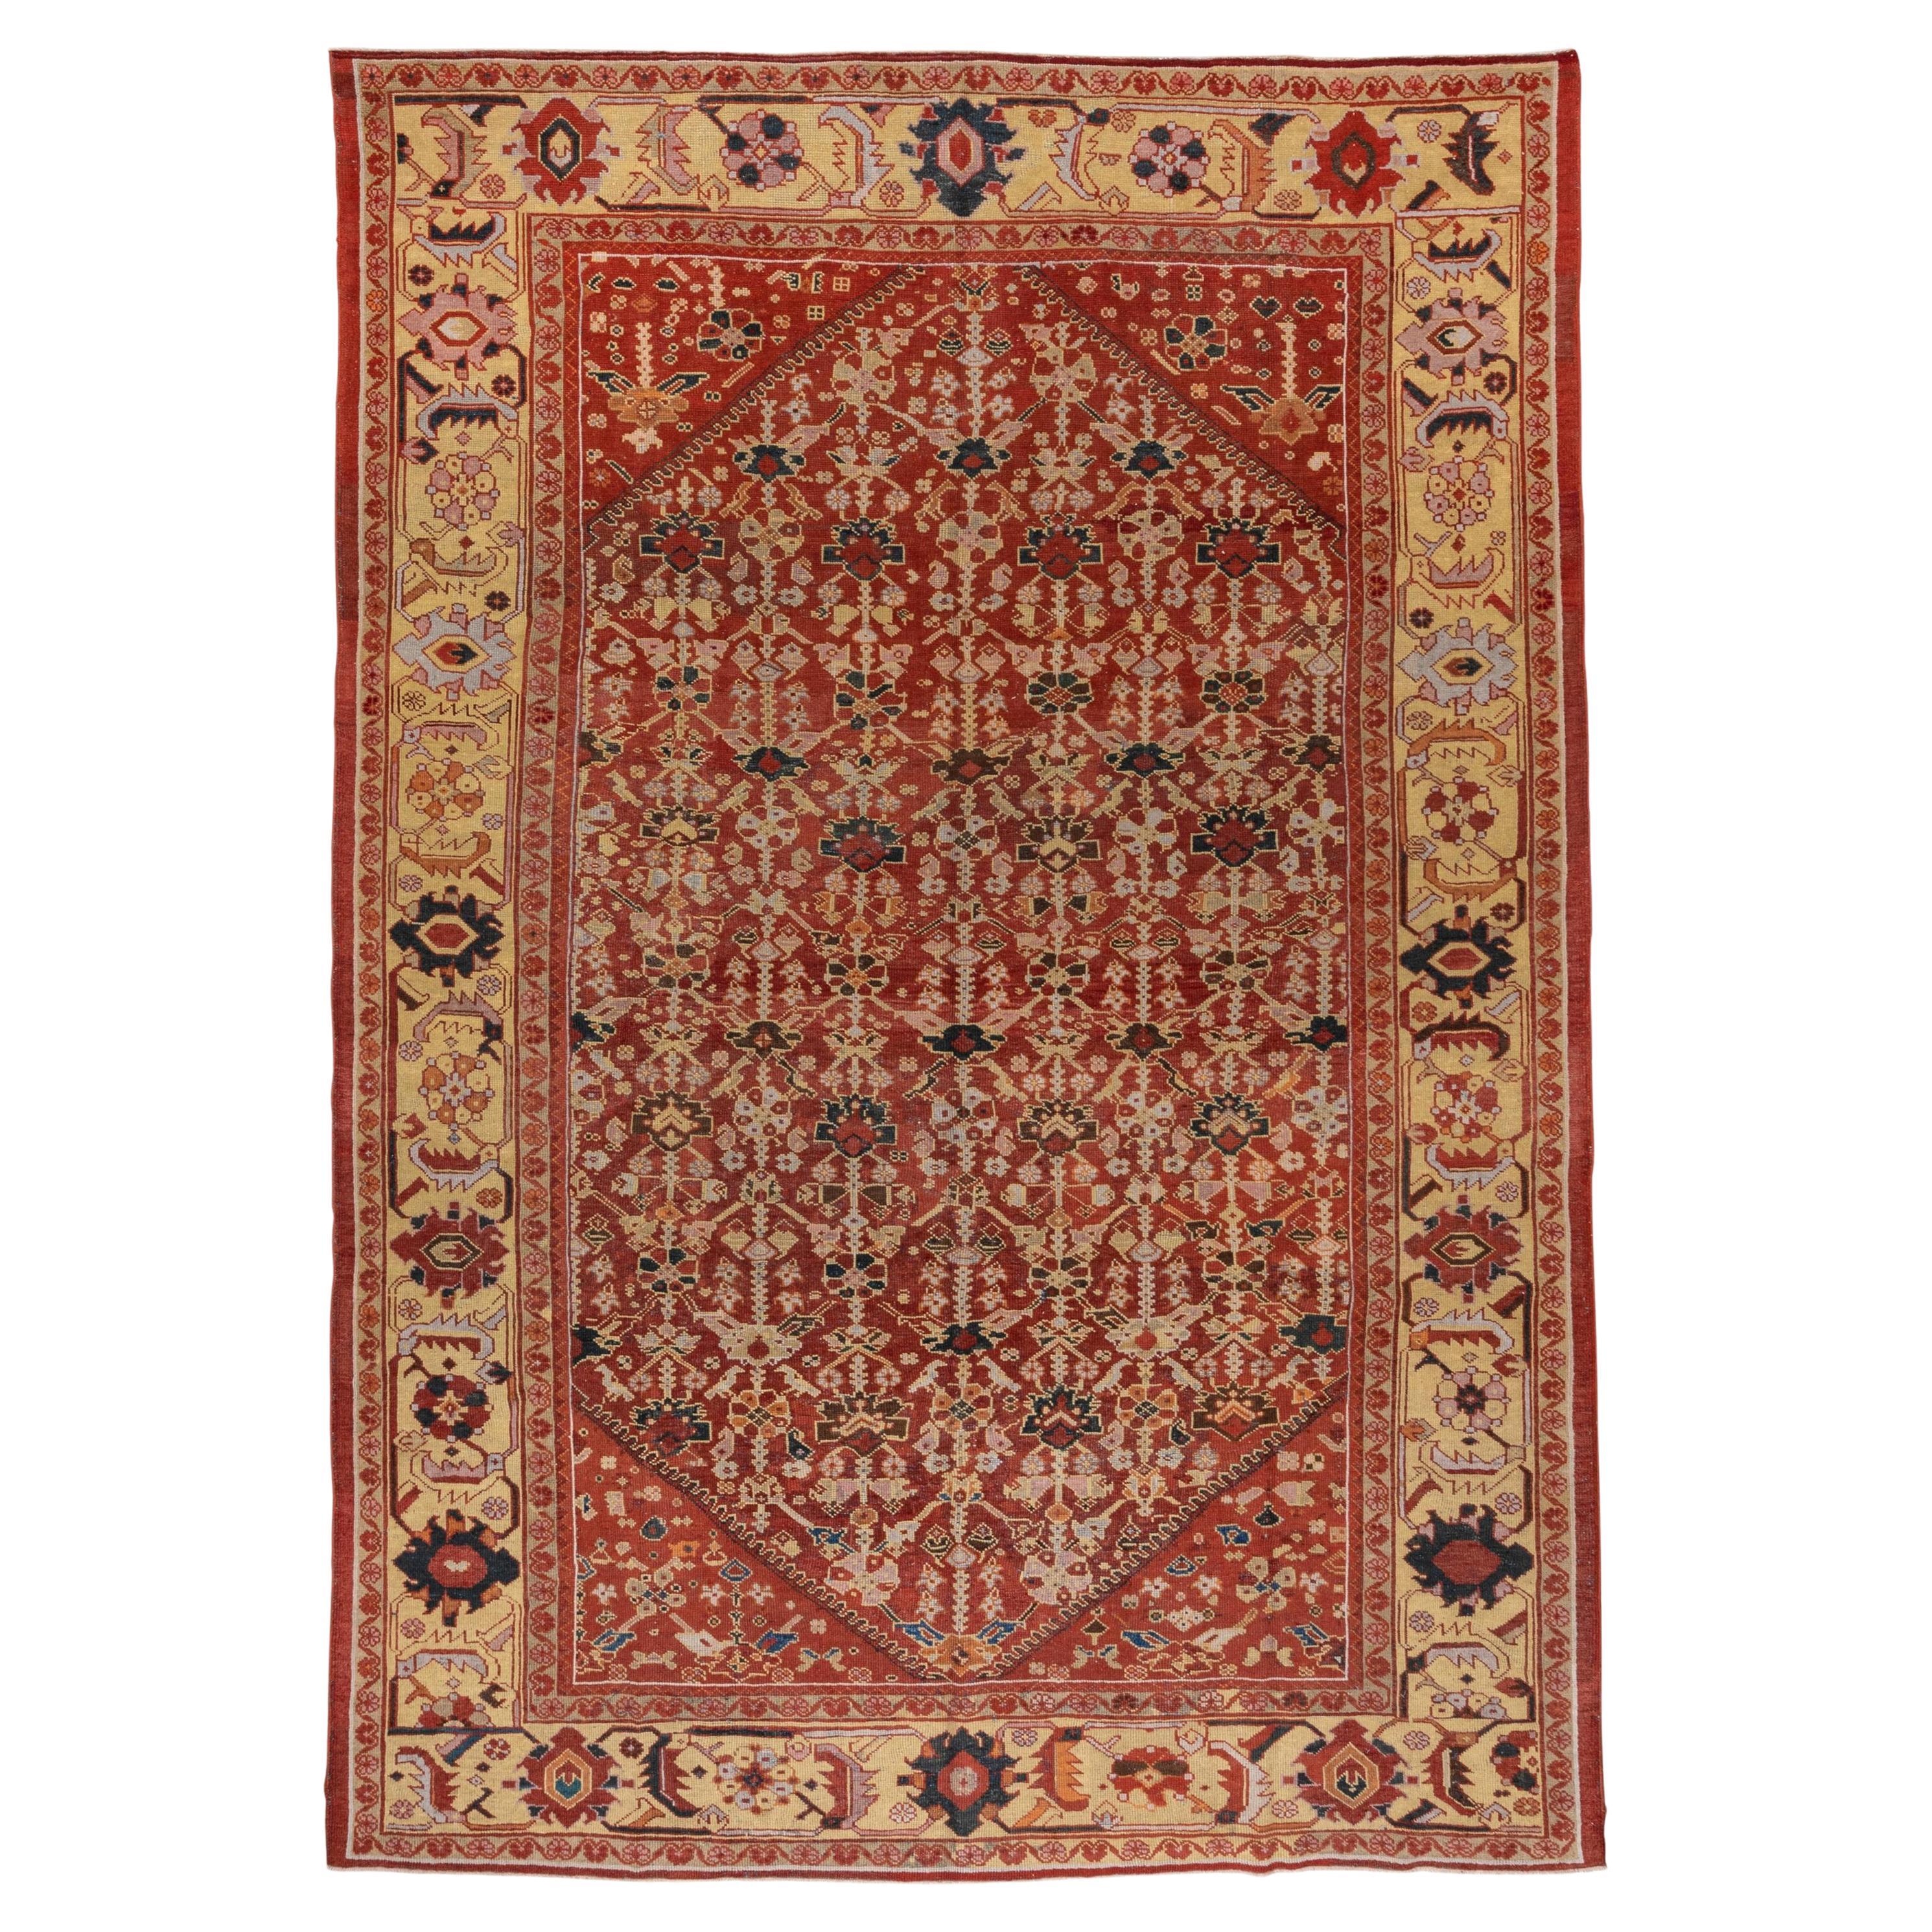 Antique Tribal Persian Mahal Rug, Allover Rusty Red Field, Yellow Borders For Sale